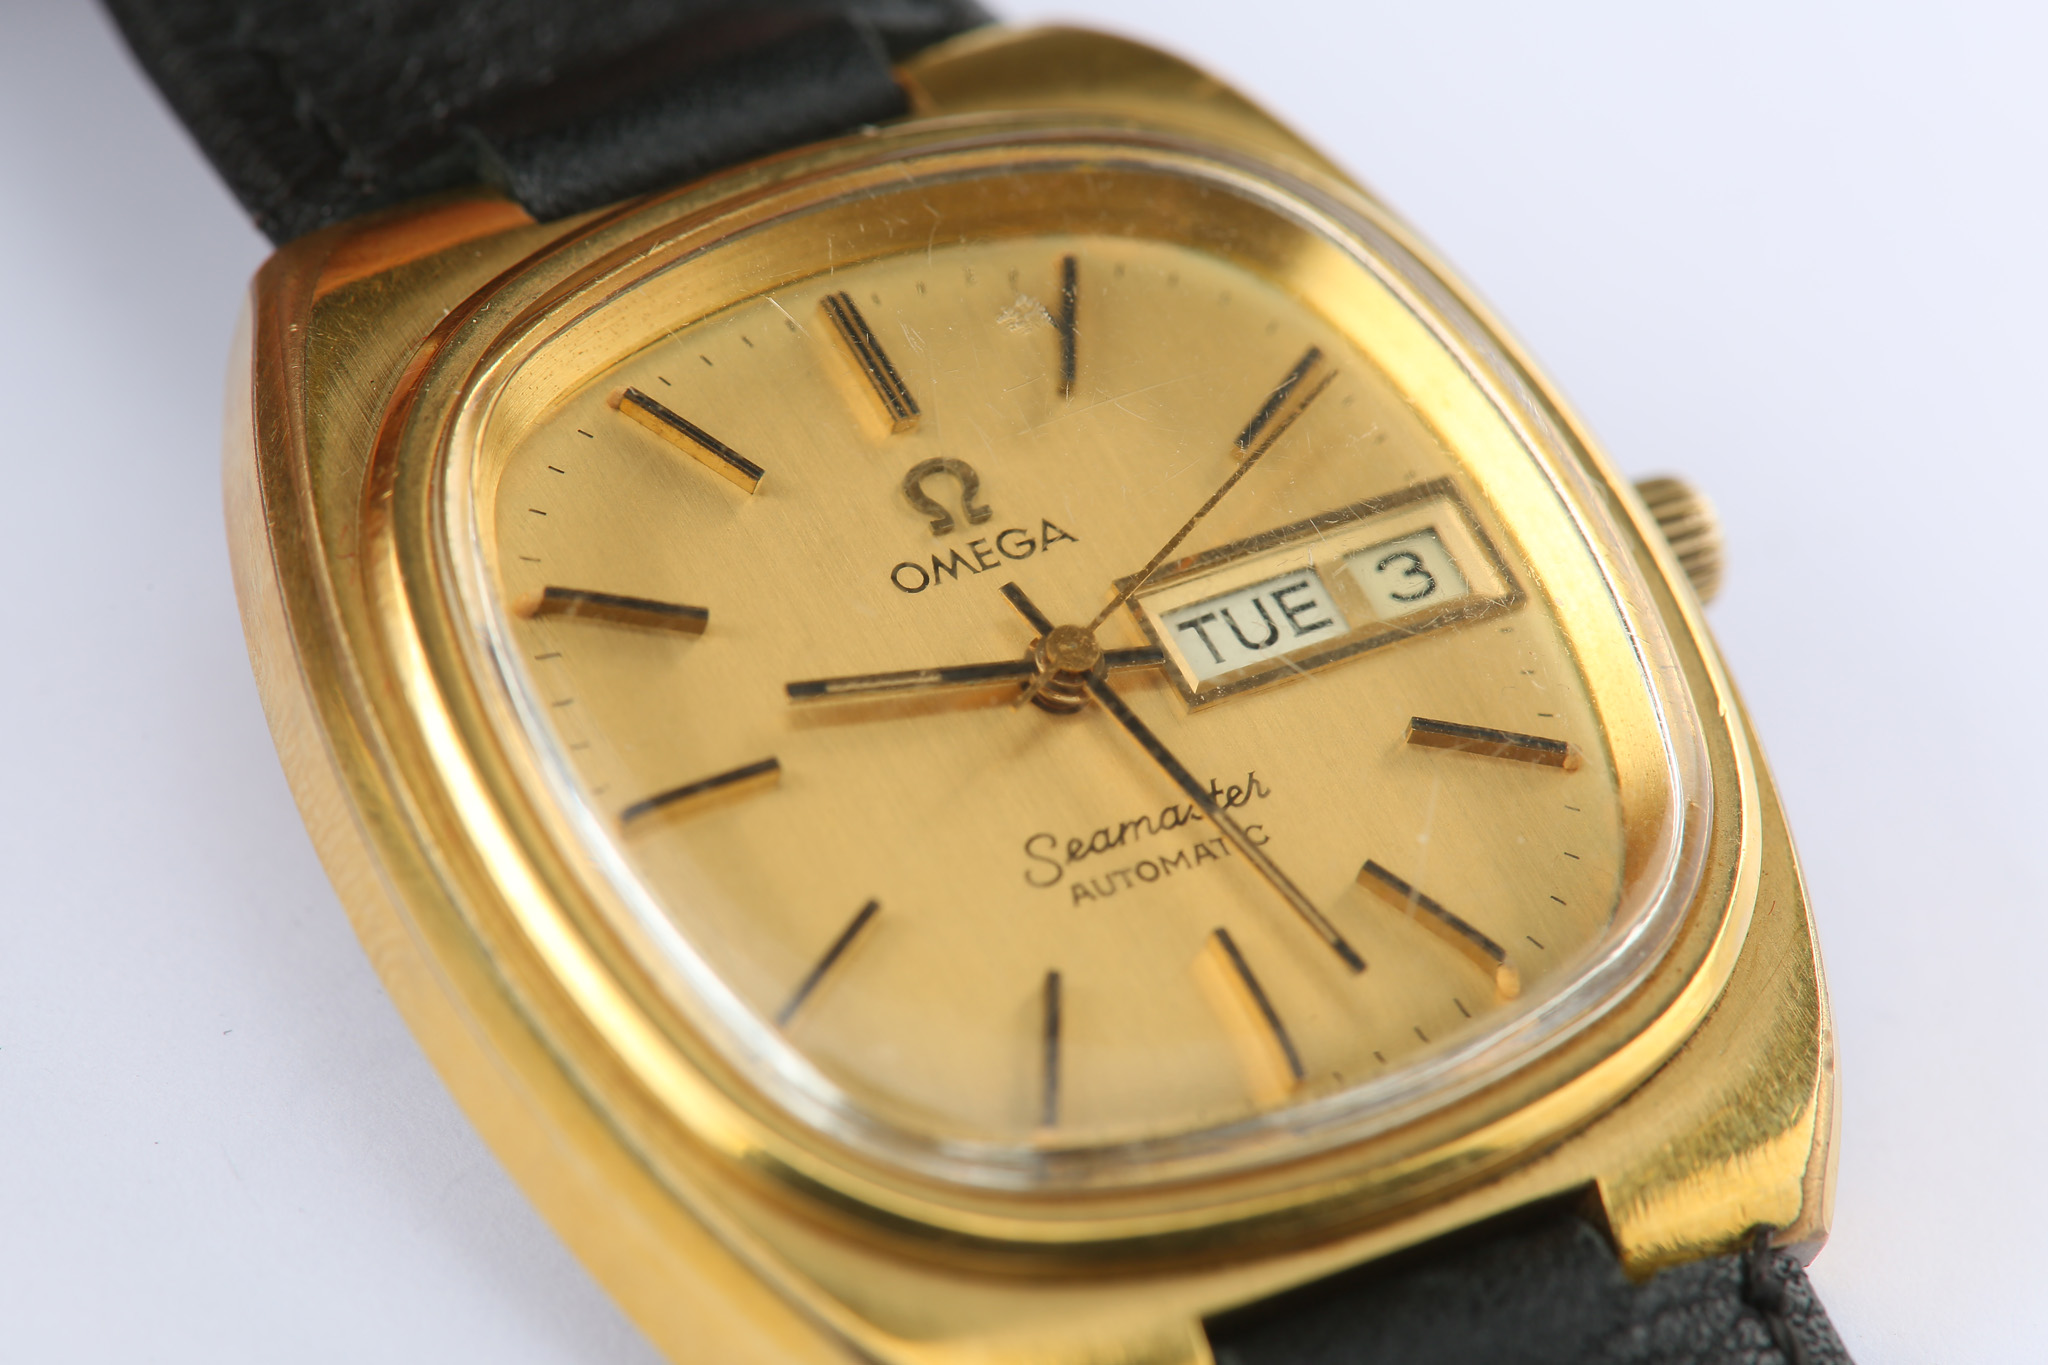 Omega. A gold capped automatic calendar wristwatch. Model: Seamaster. Reference: 166.0213 / 366. - Image 2 of 6